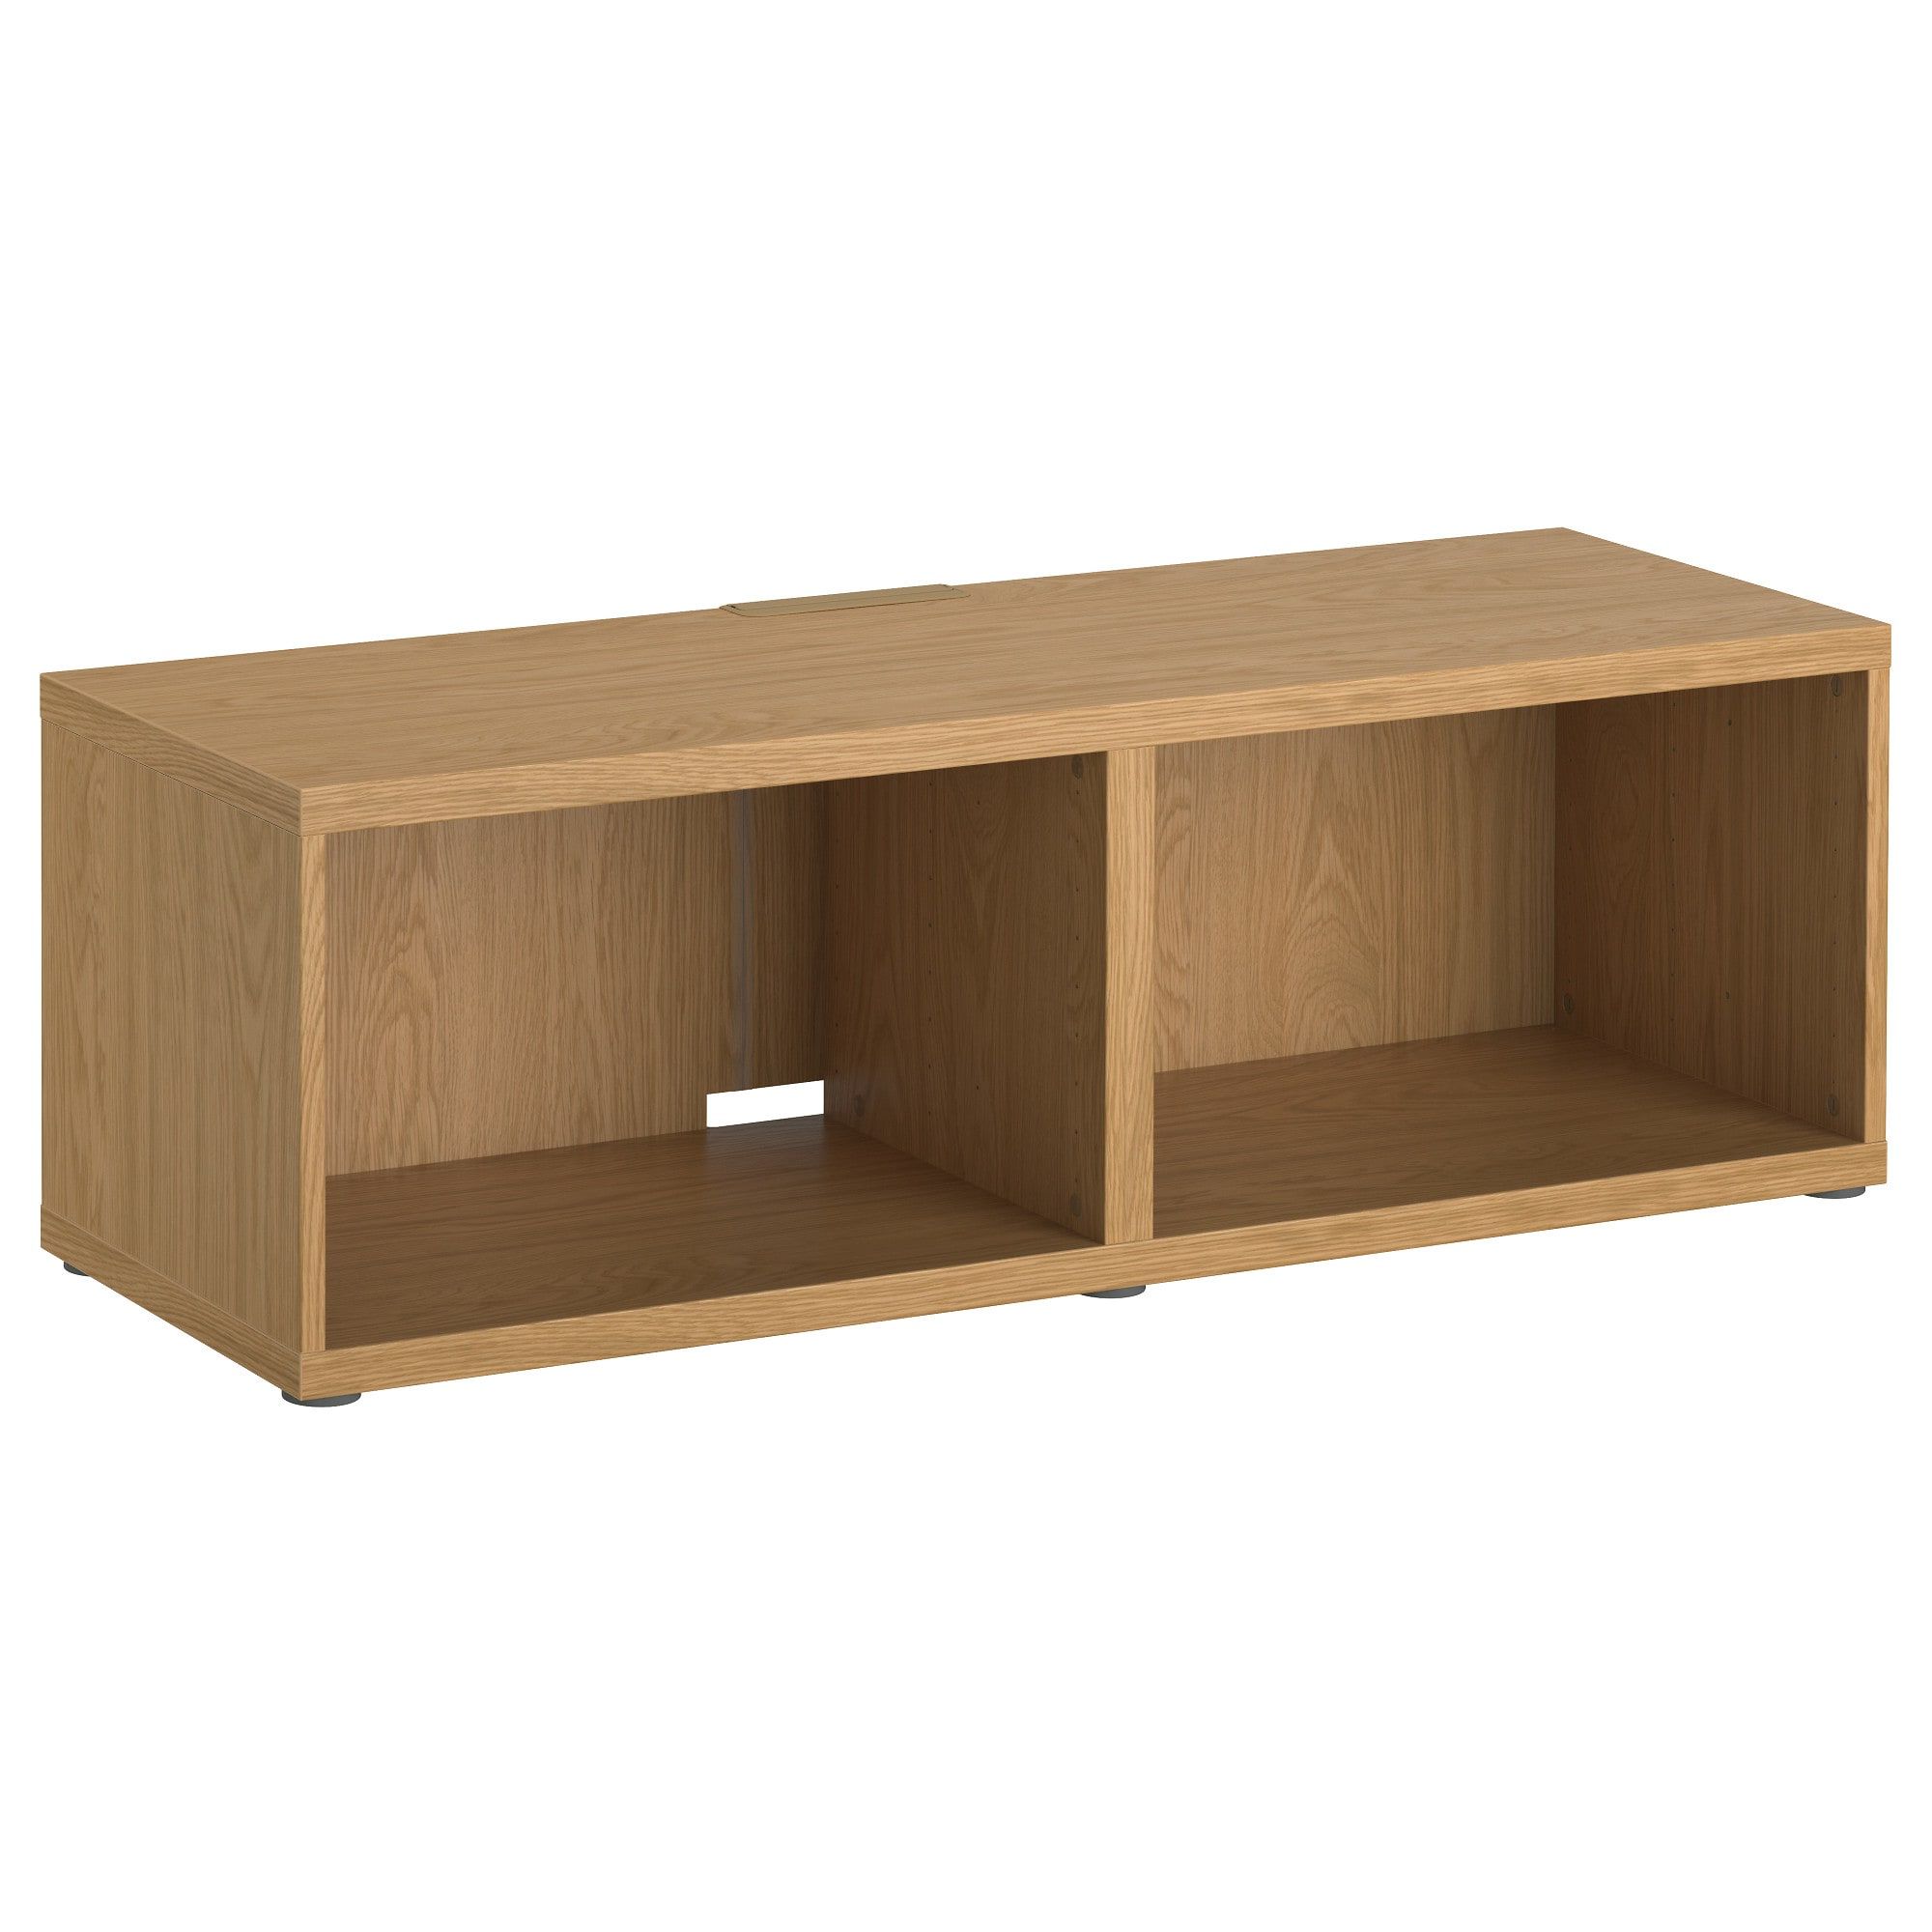 Ikea With Regard To Cheap Wood Tv Stands (View 2 of 10)